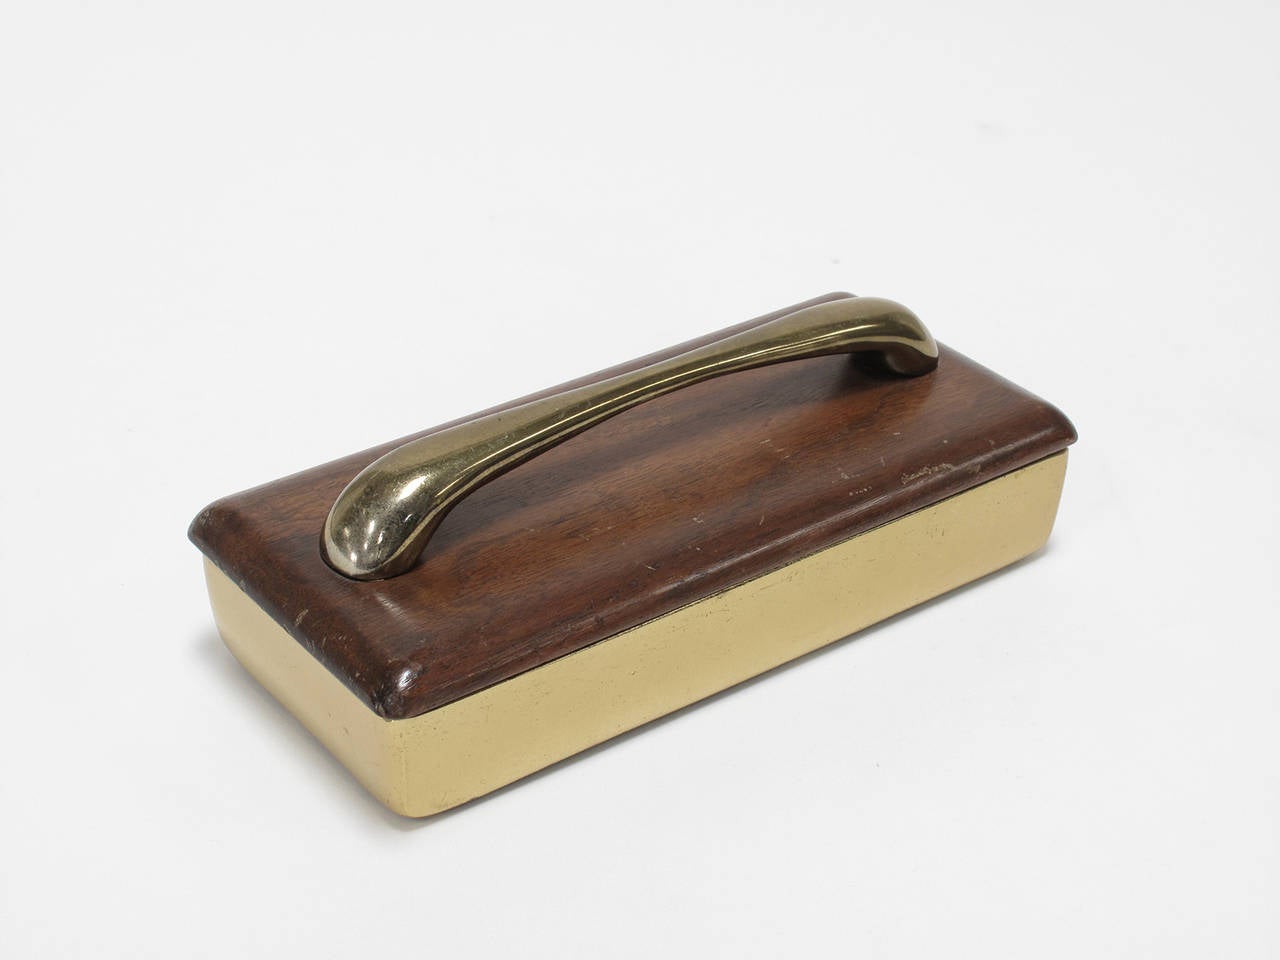 Designed by Ben Seibel and made by Jenfred Ware, New York, 1950s. Brass-plated, cork lined metal box with two storage compartments, wood lid and brass handle. Small keepsake container for trinkets, jewelry and precious objects.